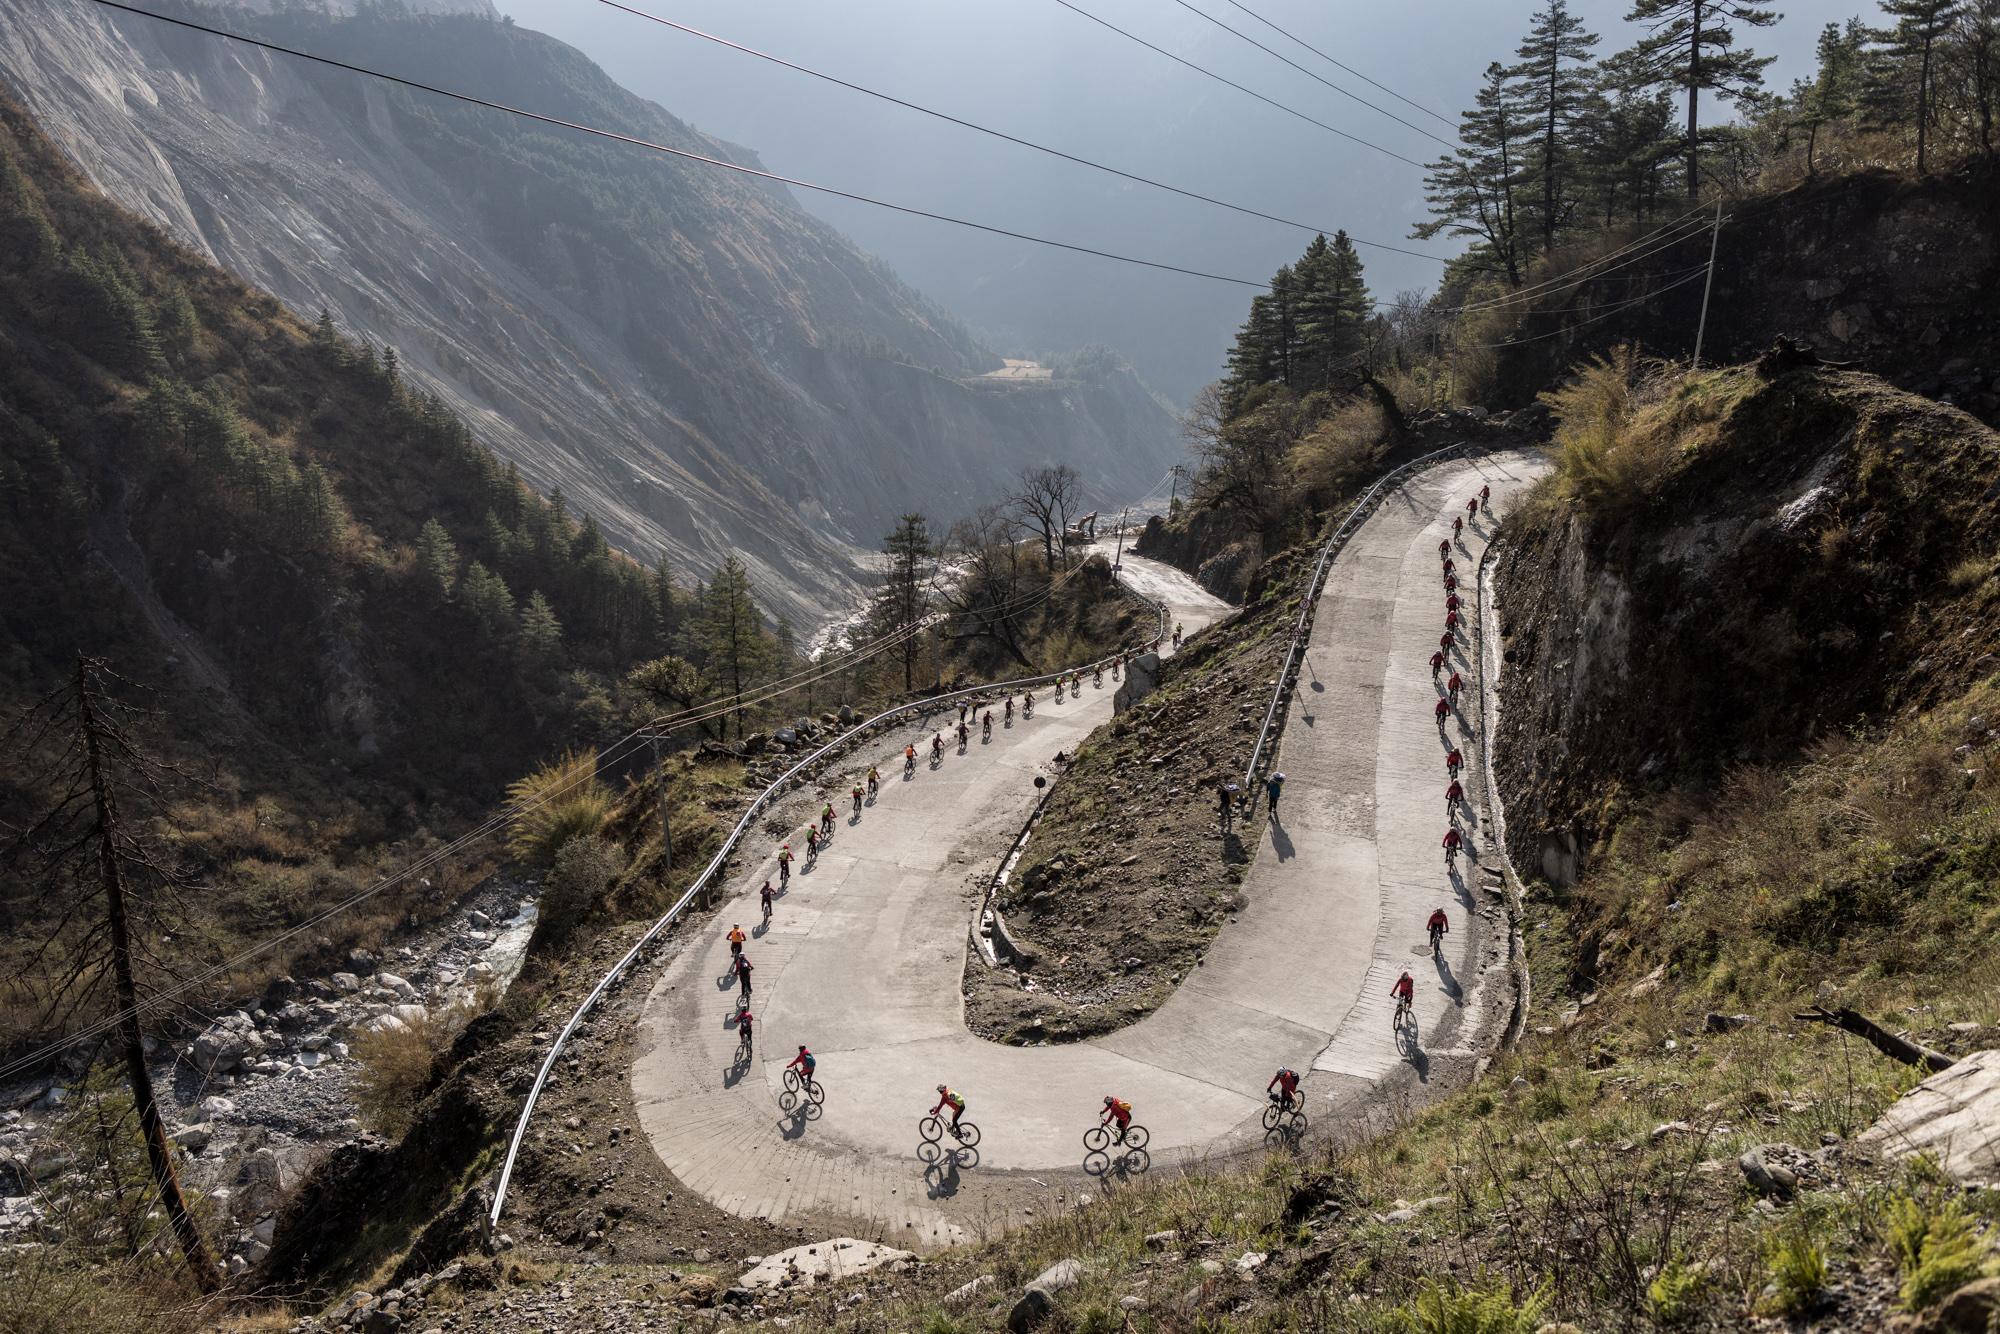 THE KUNG FU NUNS OF THE HIMALAYAS  - The Kung Fu Nuns ride their mountain bikes in the morning...